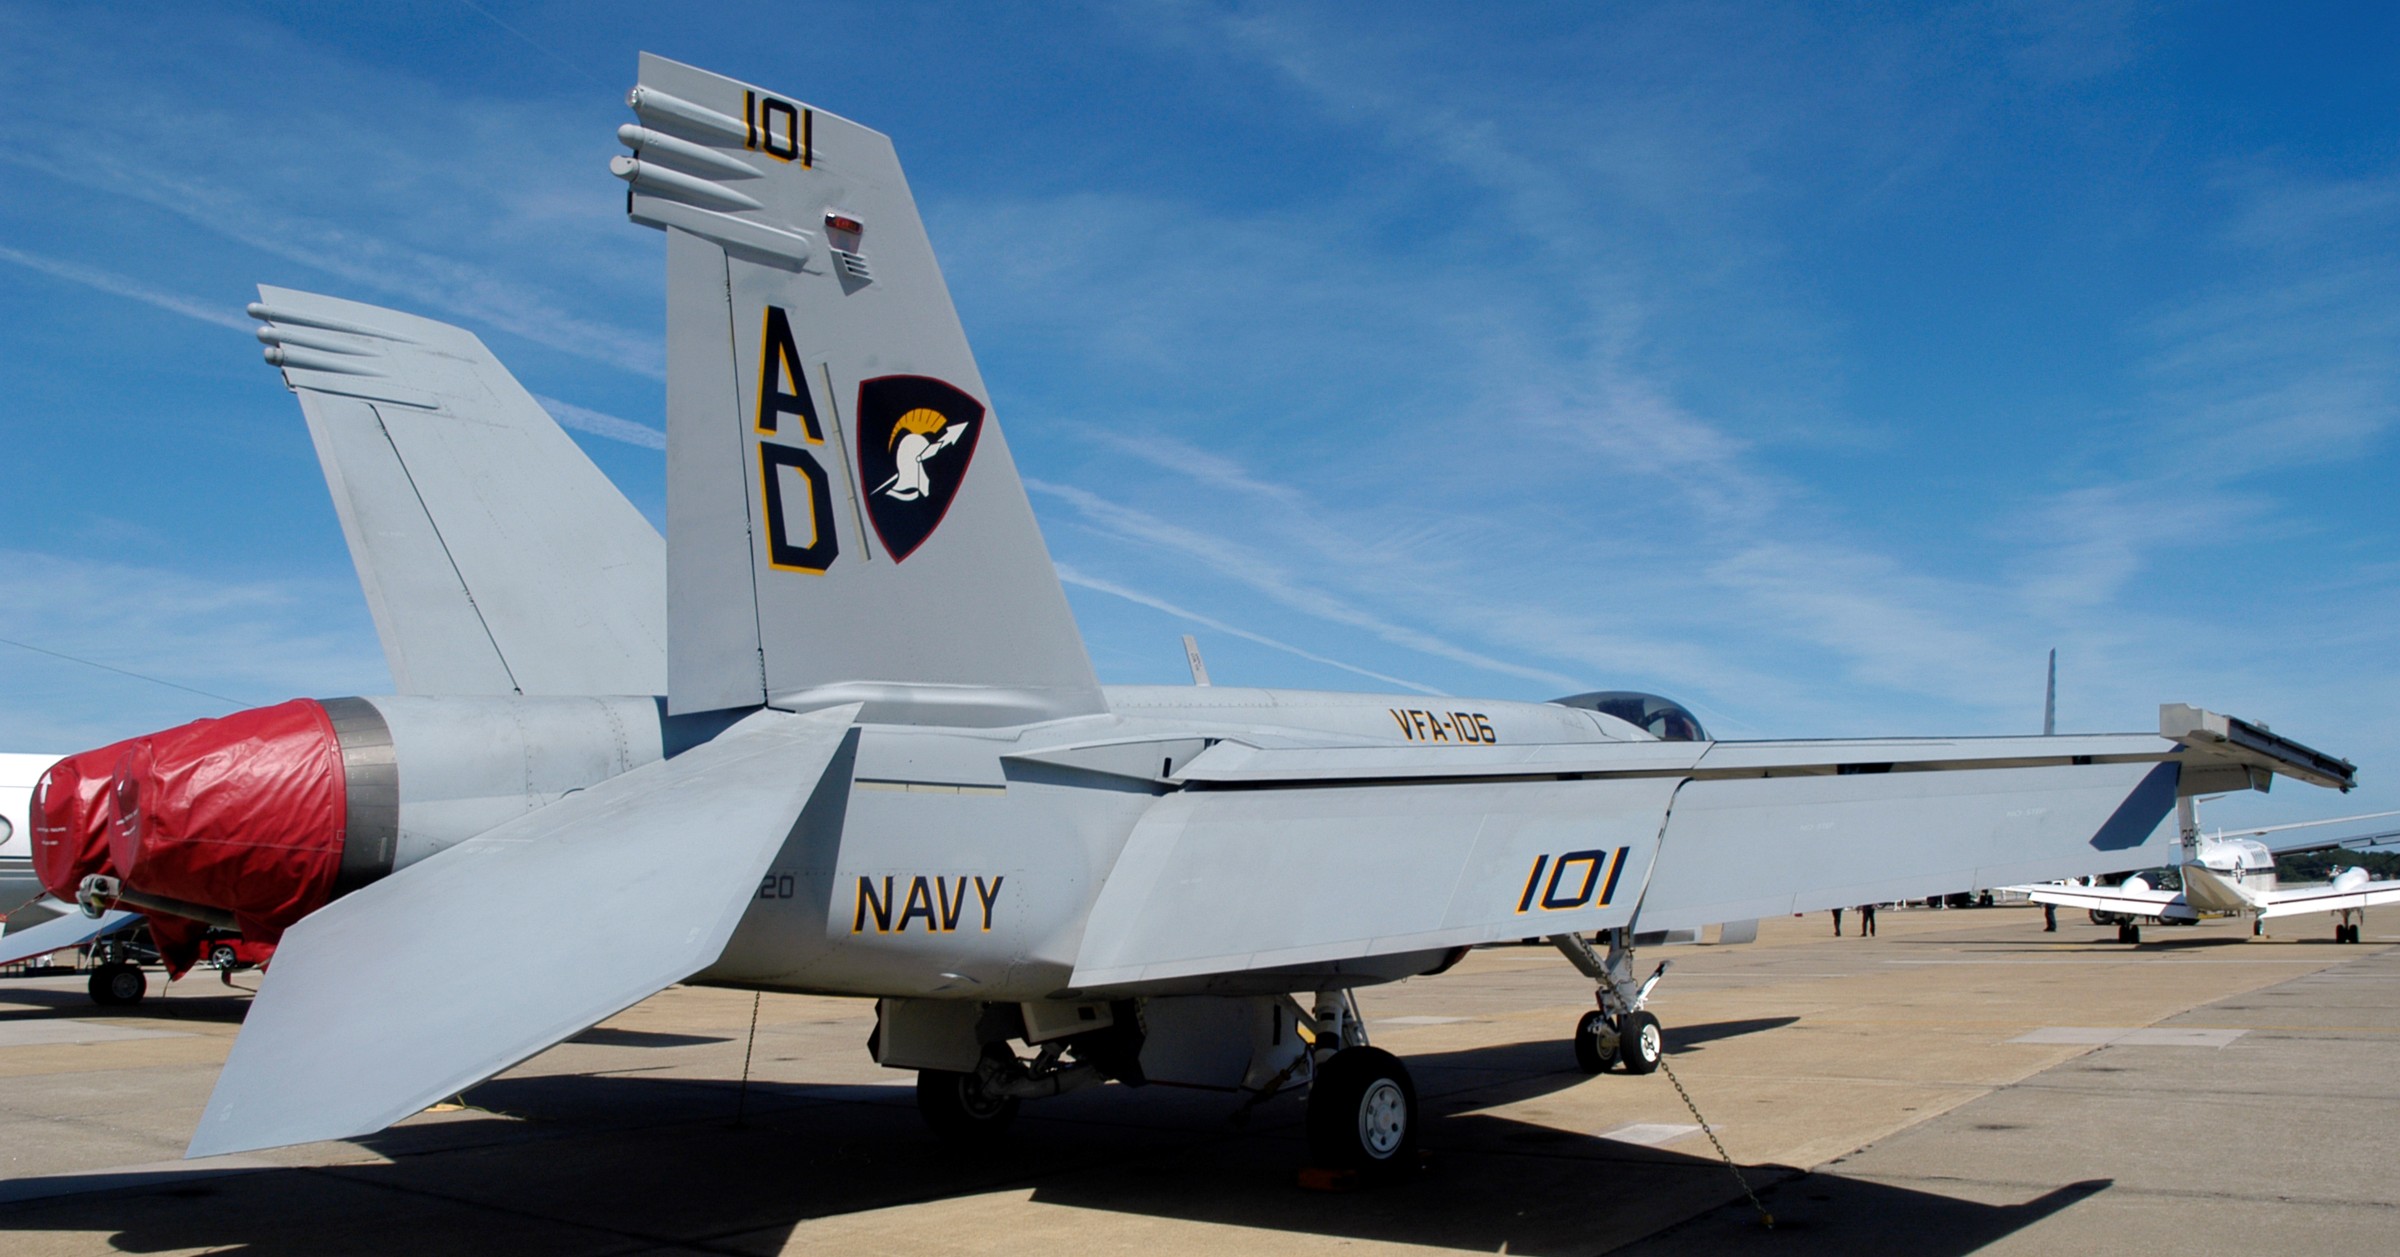 vfa-106 gladiators strike fighter squadron us navy replacement f/a-18 super hornet nas oceana